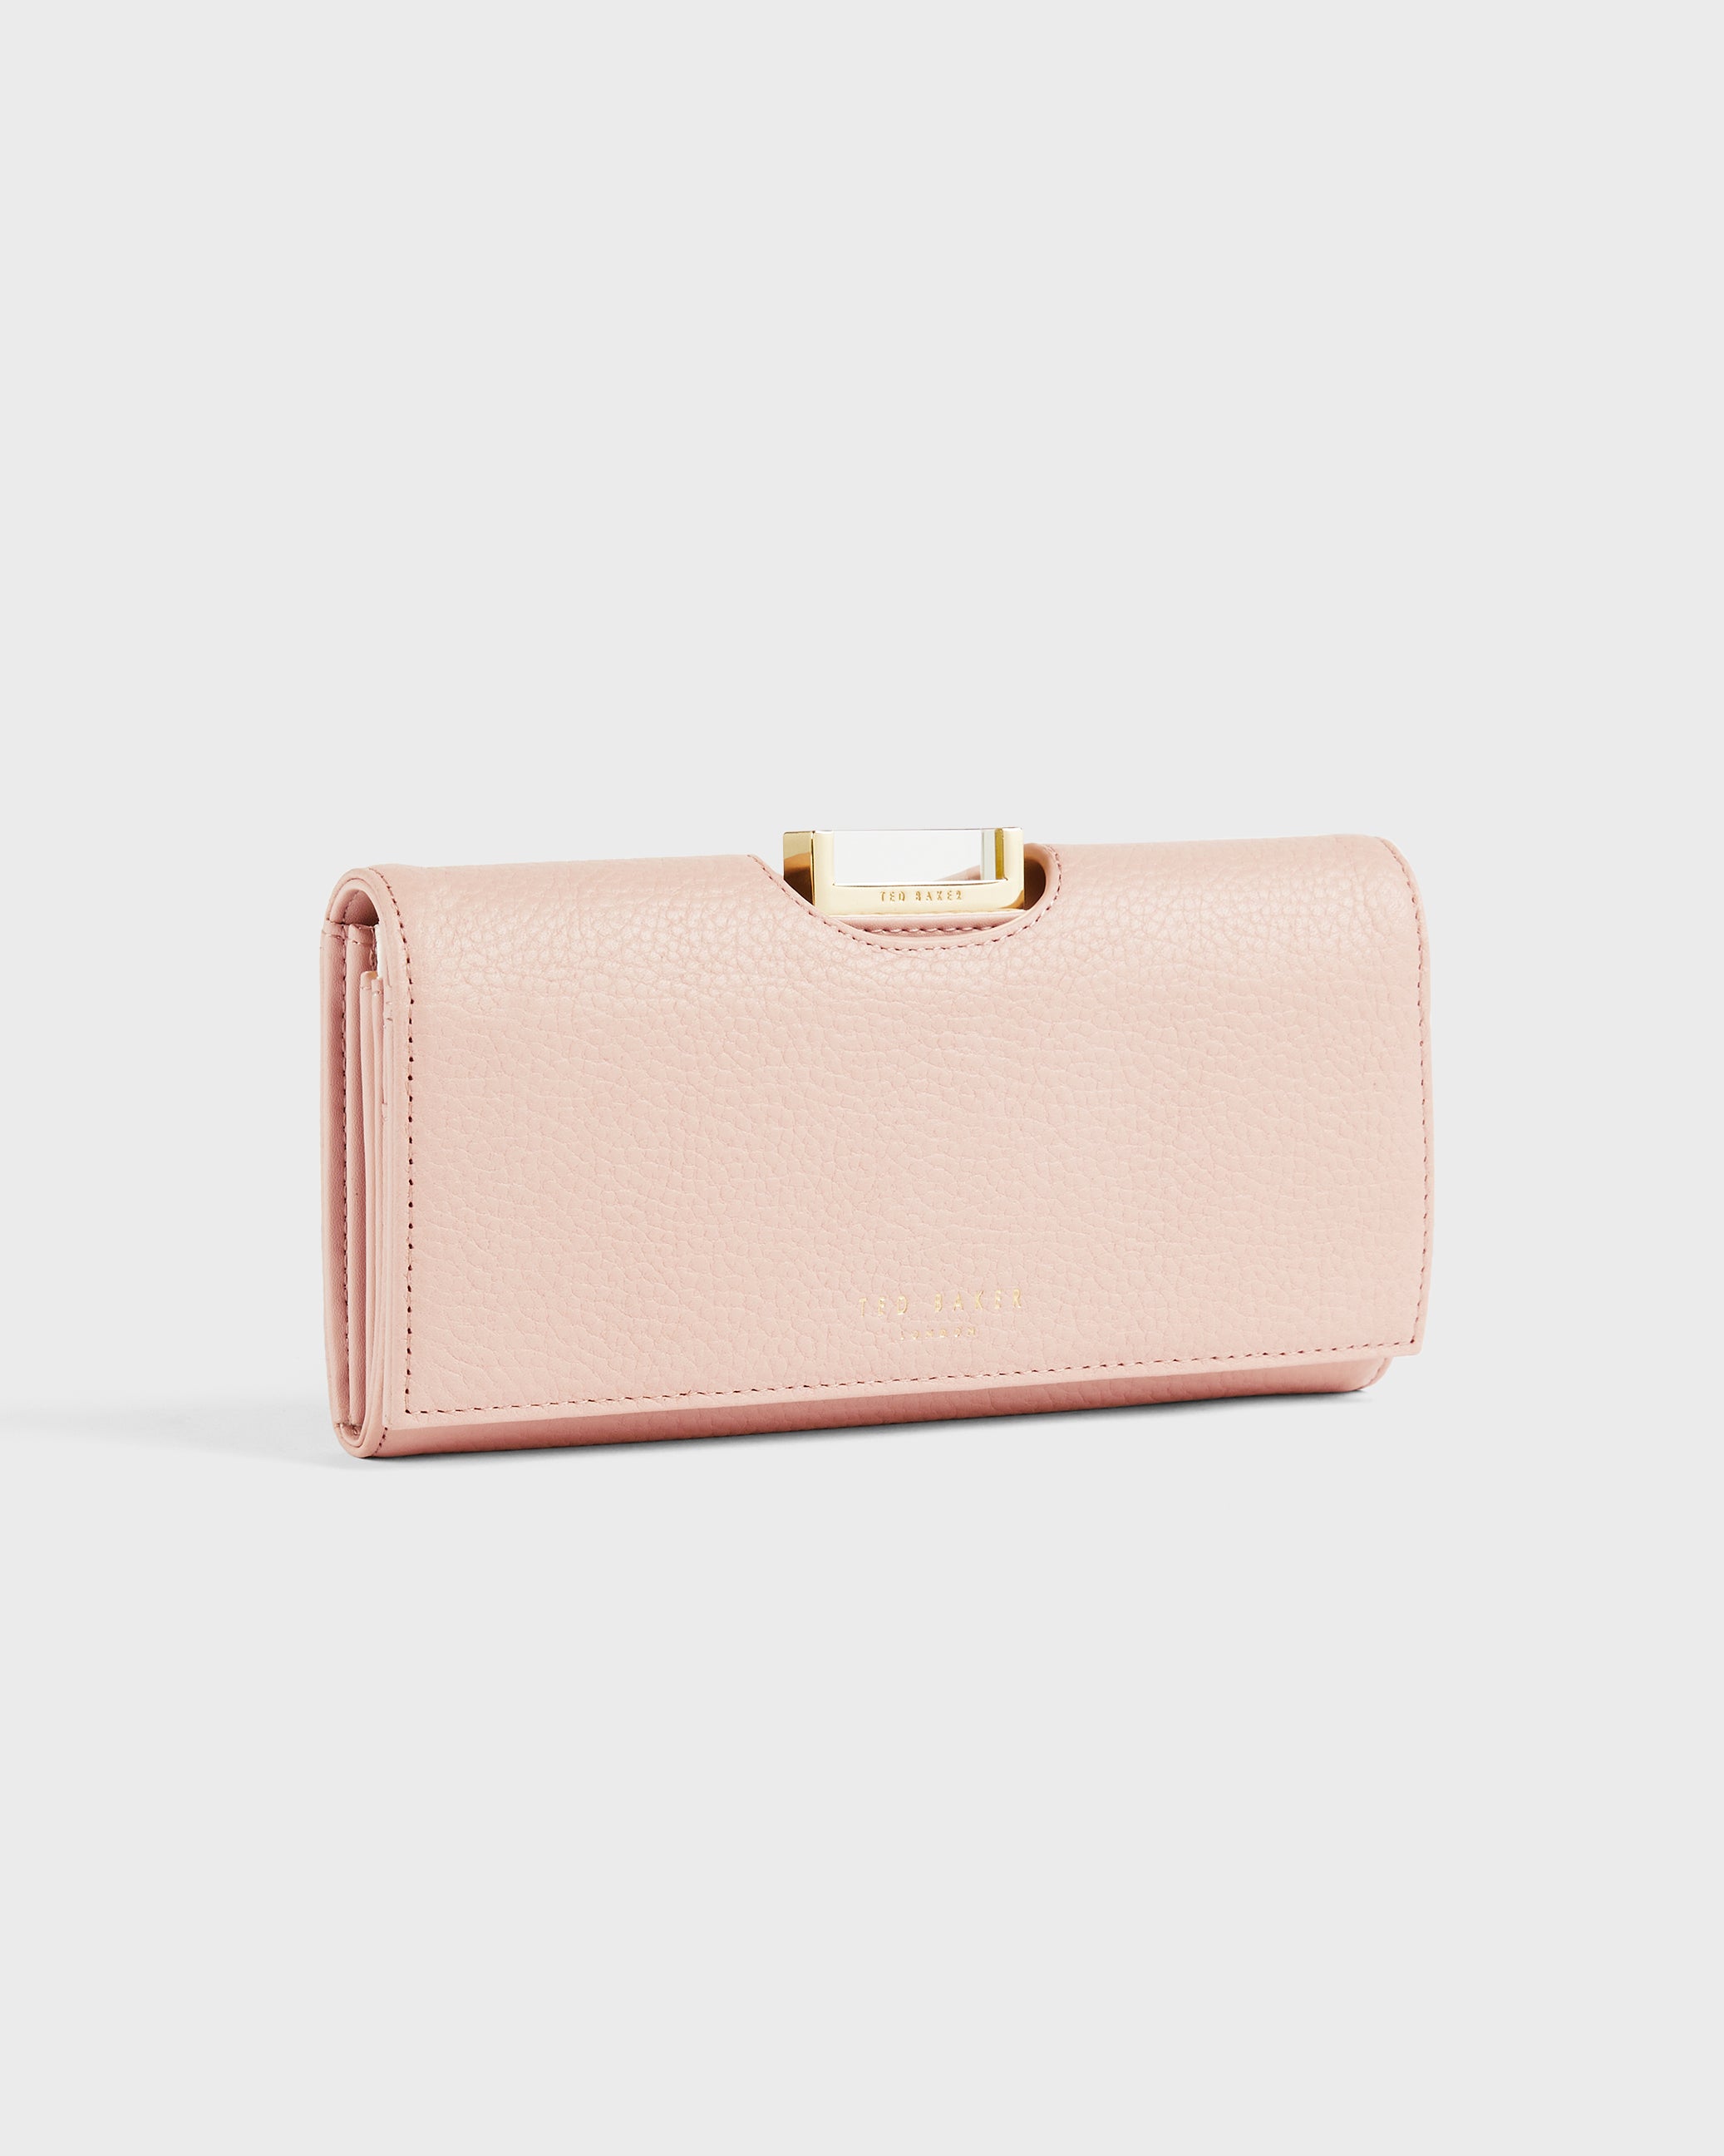 Ted Baker Teena Leather Coin Purse, Nude Pink ($52) ❤ liked on Polyvore  featuring bags, wallets, pink w… | Leather change purse, Leather wallet,  Pink leather wallet